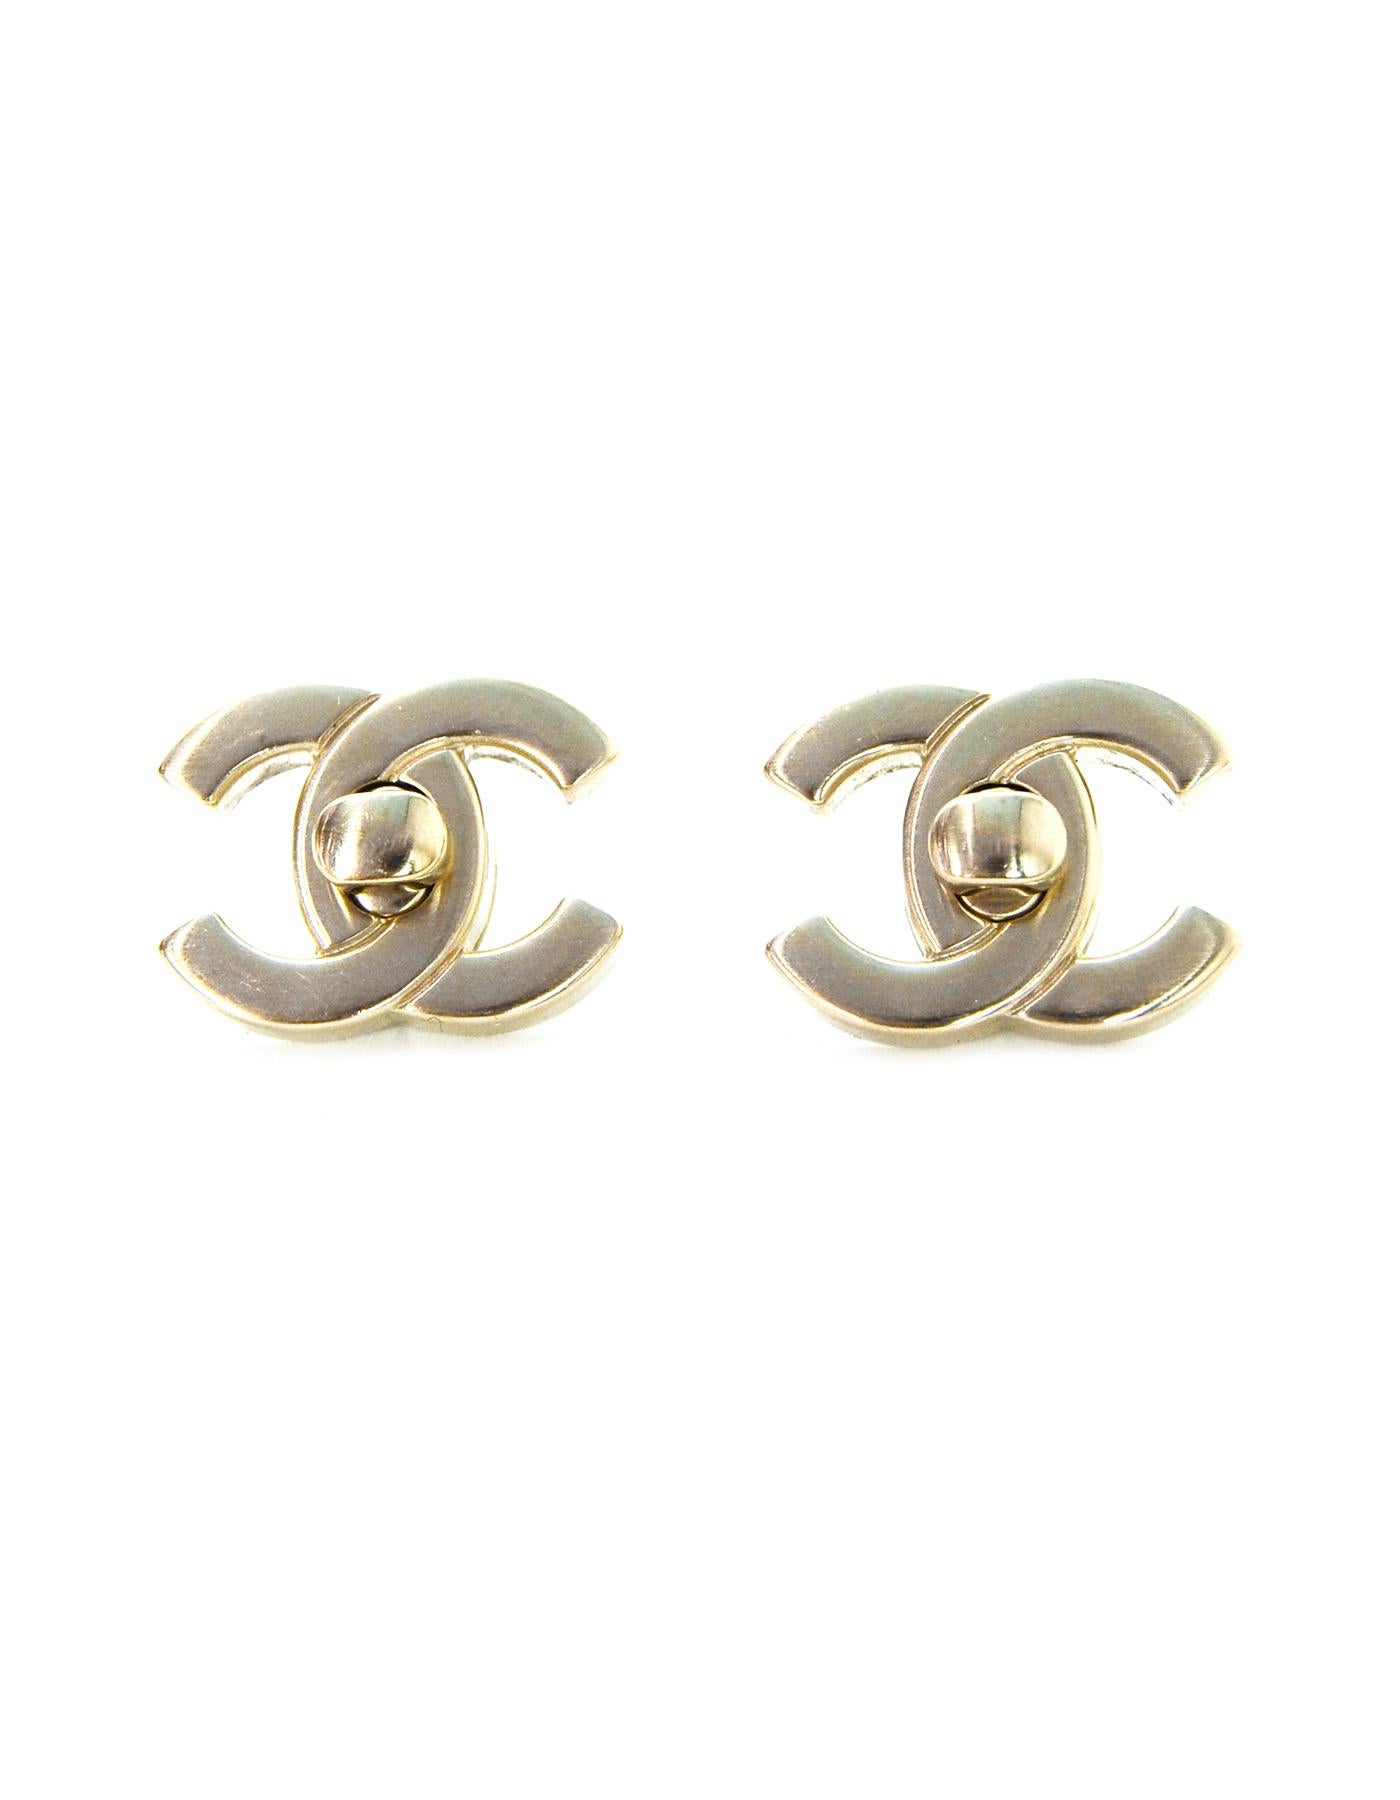 Chanel Convertable CC Twistlock Pierced Earrings. Features optional matte goldtone and iridescent CC that is changed using the center twistlock.

Made In: Italy
Year of Production: 2018
Colors: Light goldtone, iridescent multicolor
Materials: